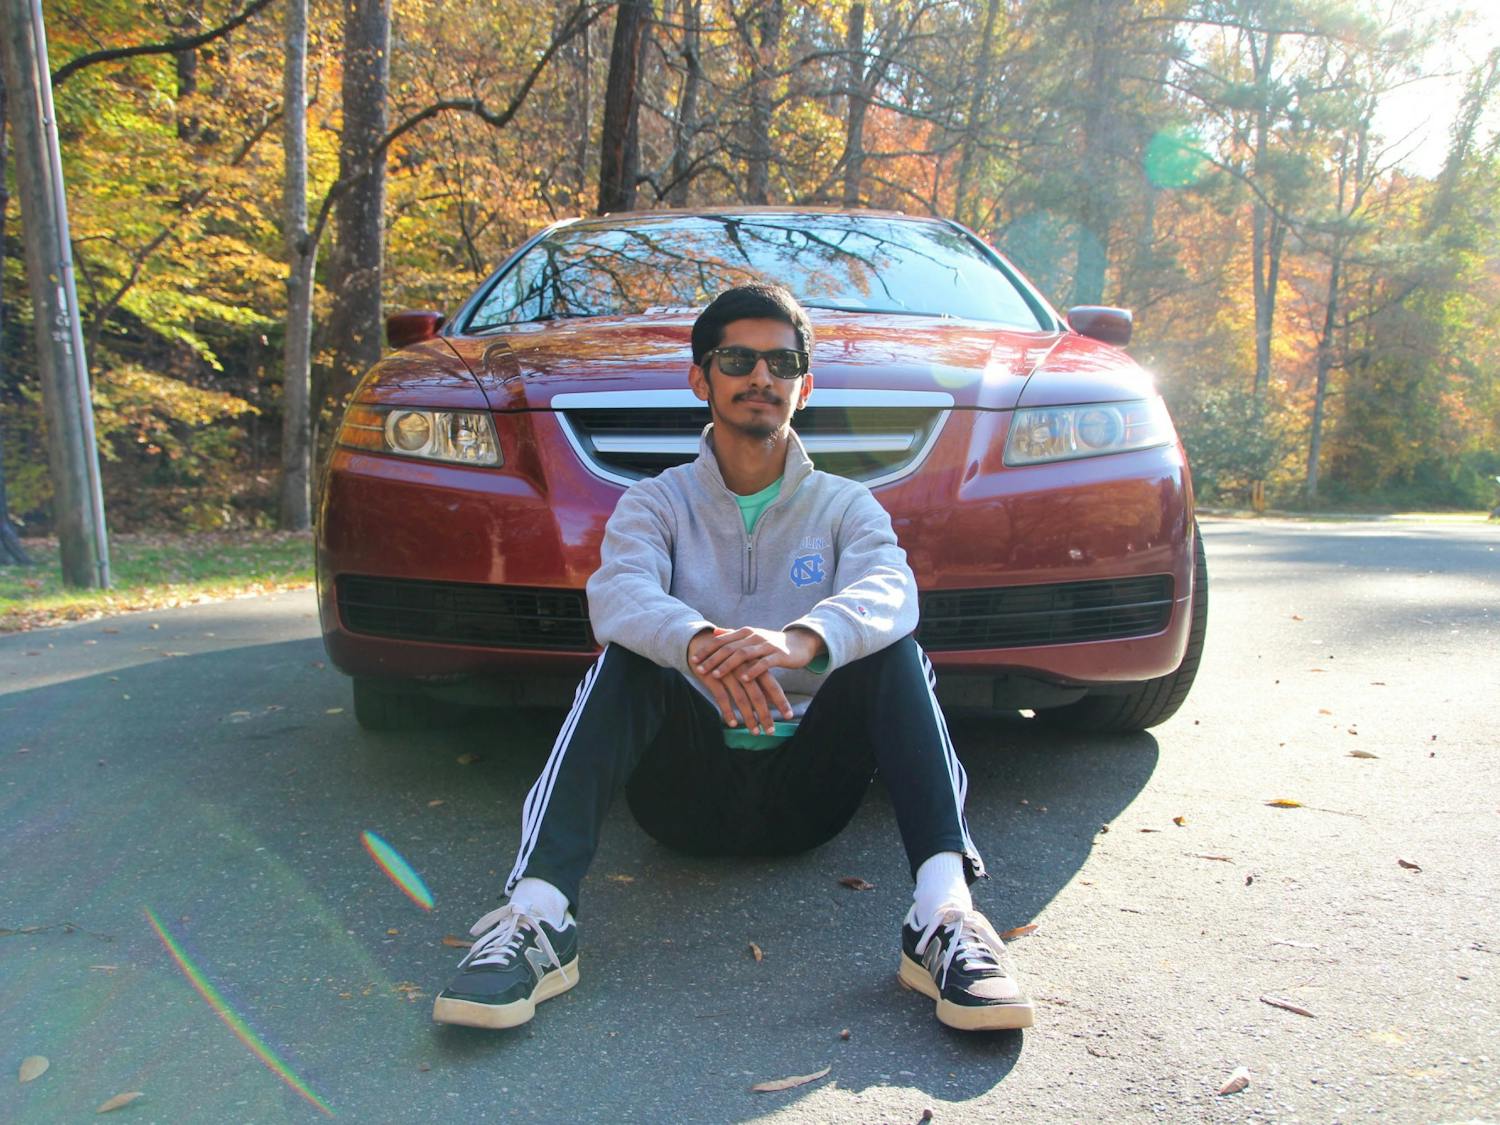 UNC junior and Carolina Car Club president Sachith Iyengar poses with his Acura at Umstead Park on Nov. 17.